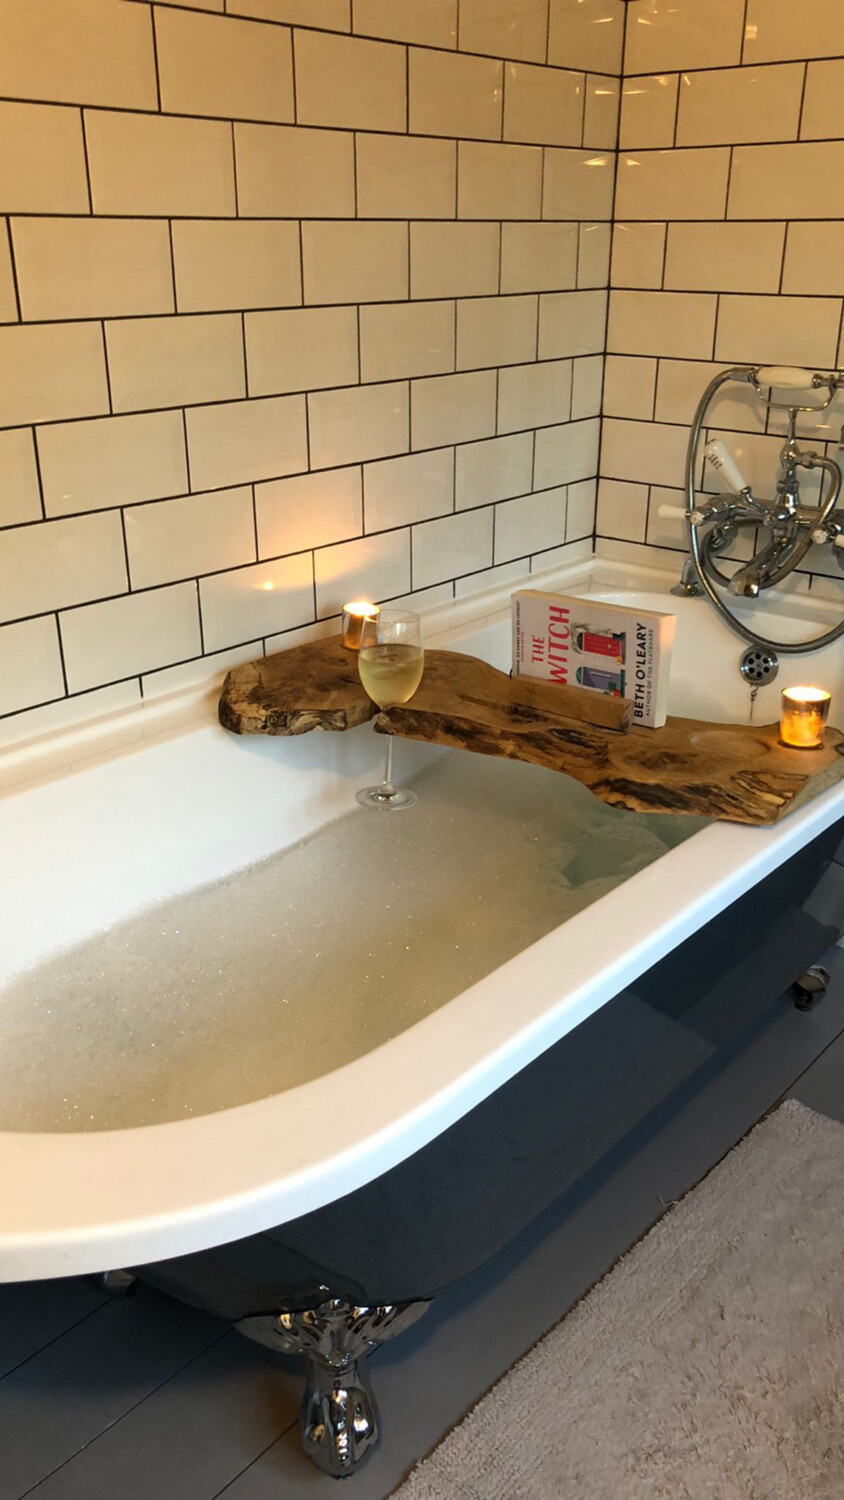 Double Live Edge Solid Pippy Oak wood Bespoke Rustic Bath Caddy Tray Tablet Holder